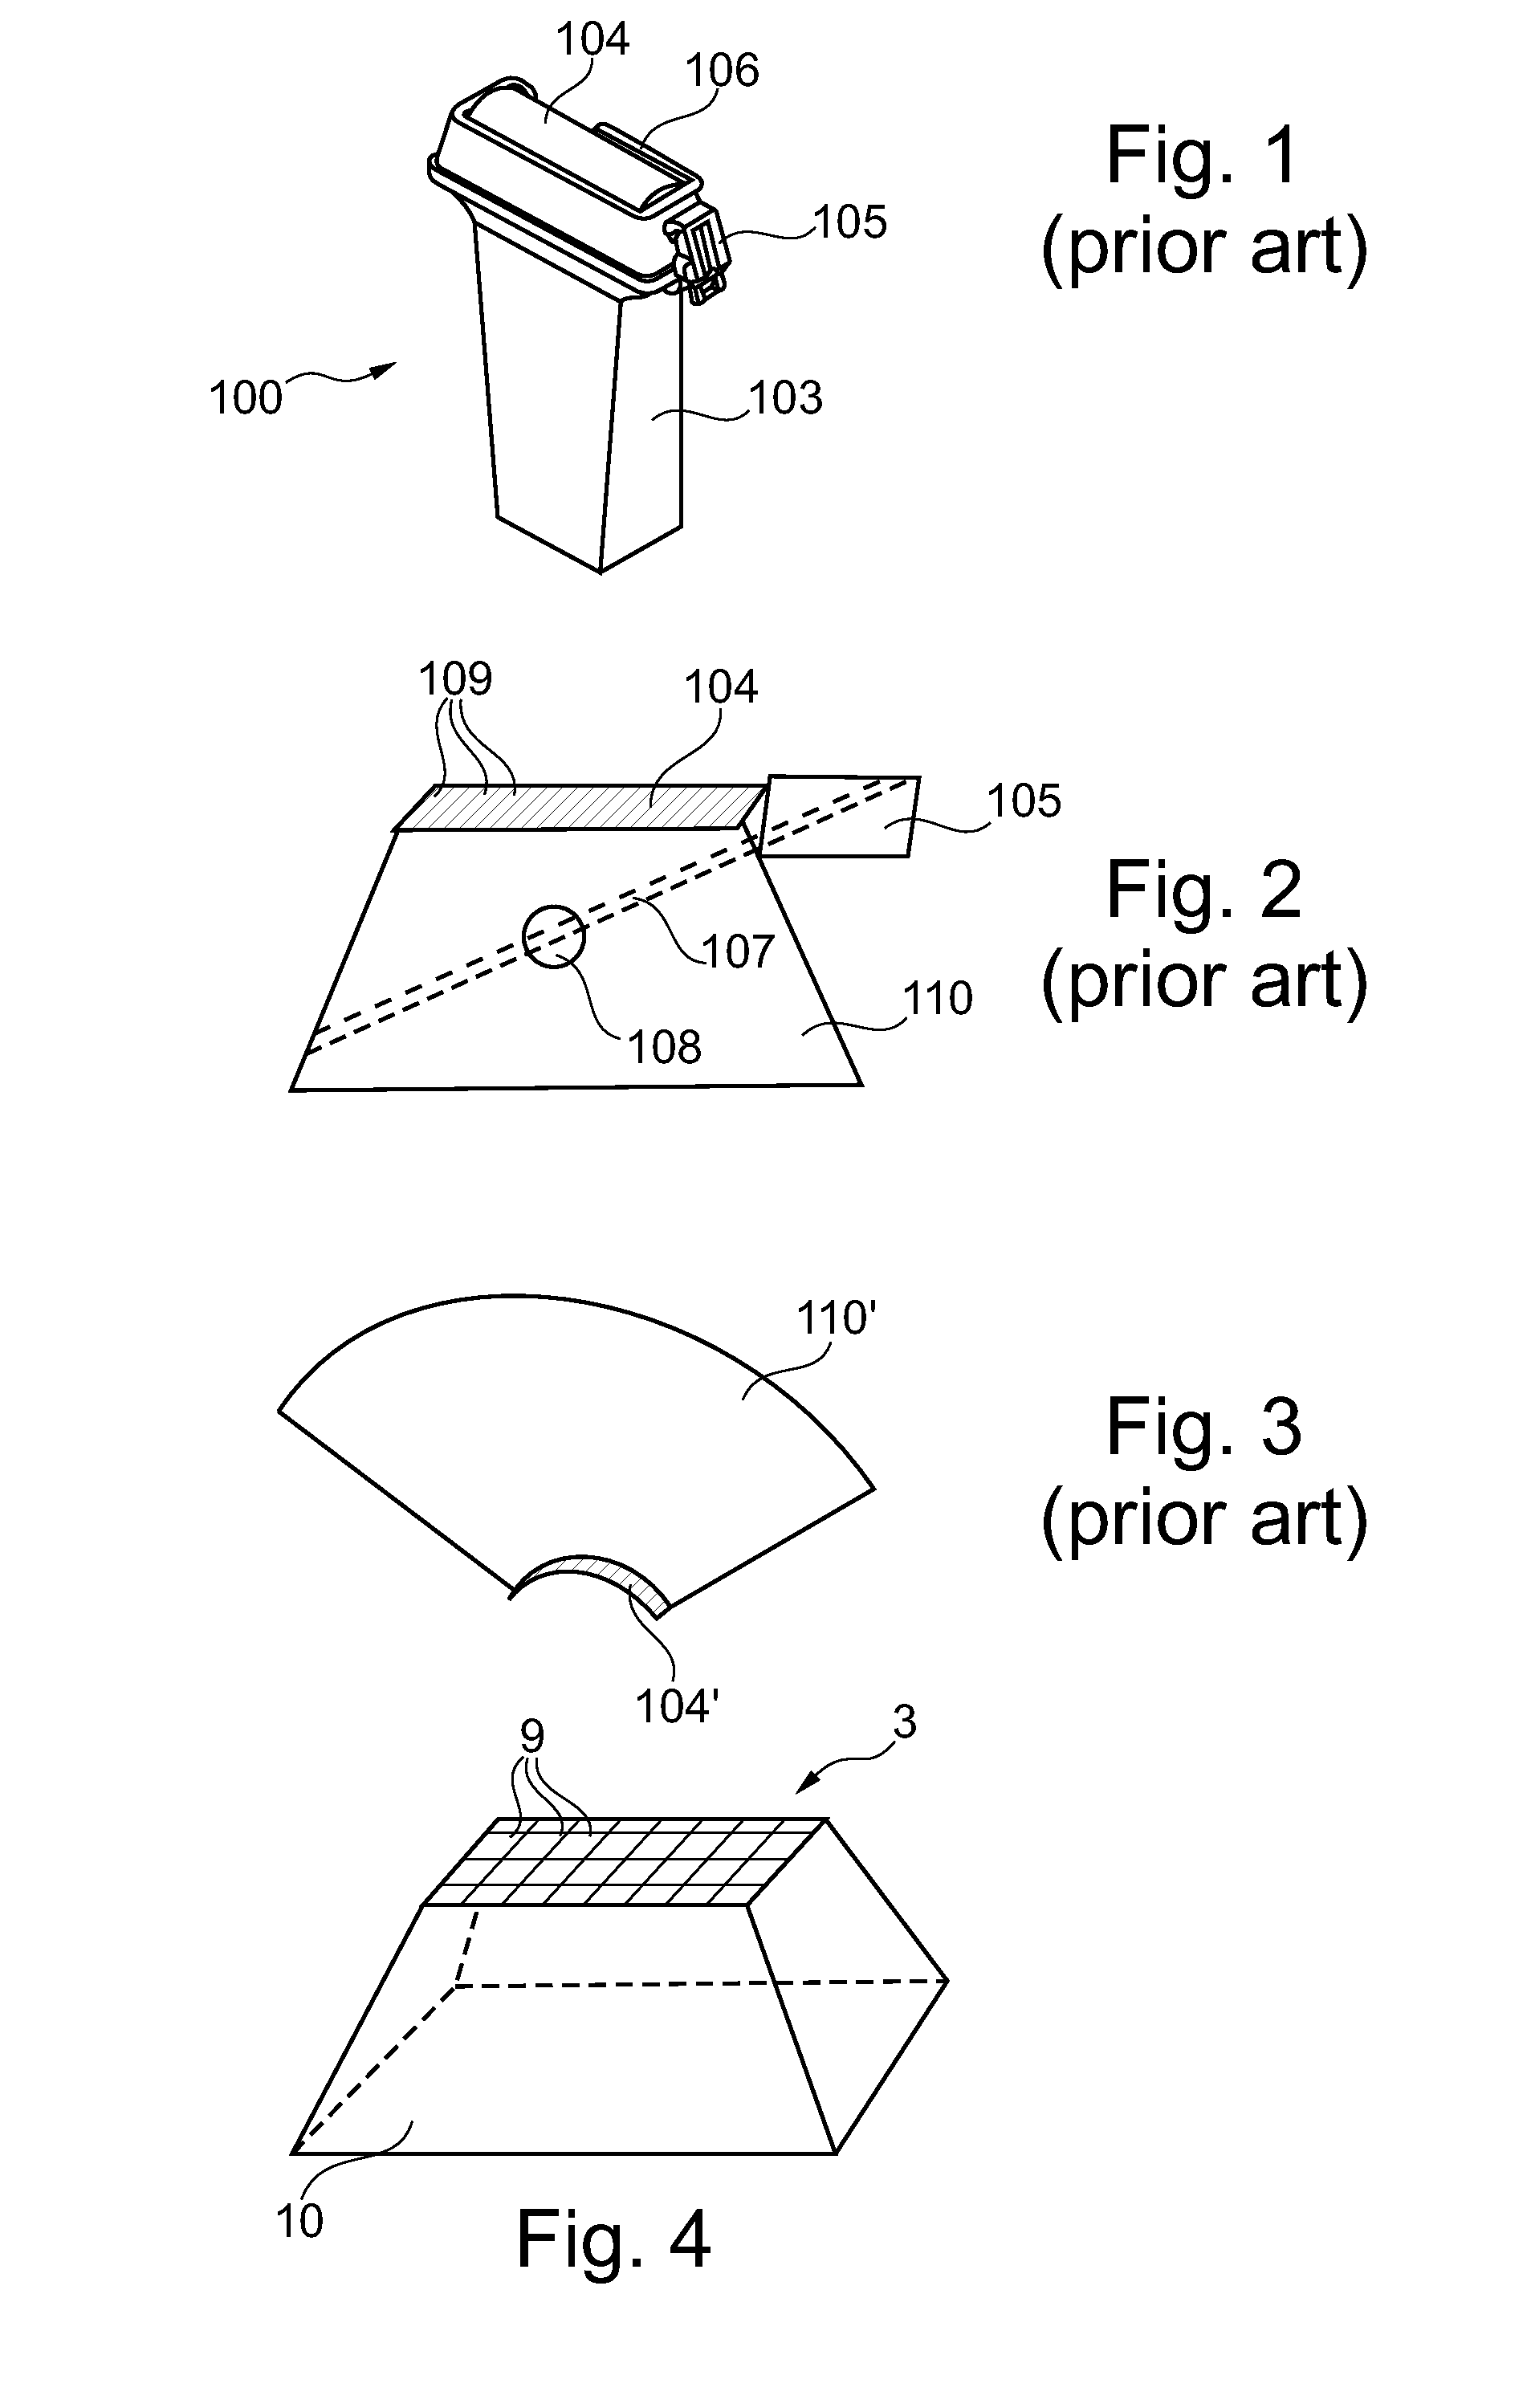 Biopsy guide system with an ultrasound transducer and method of using same